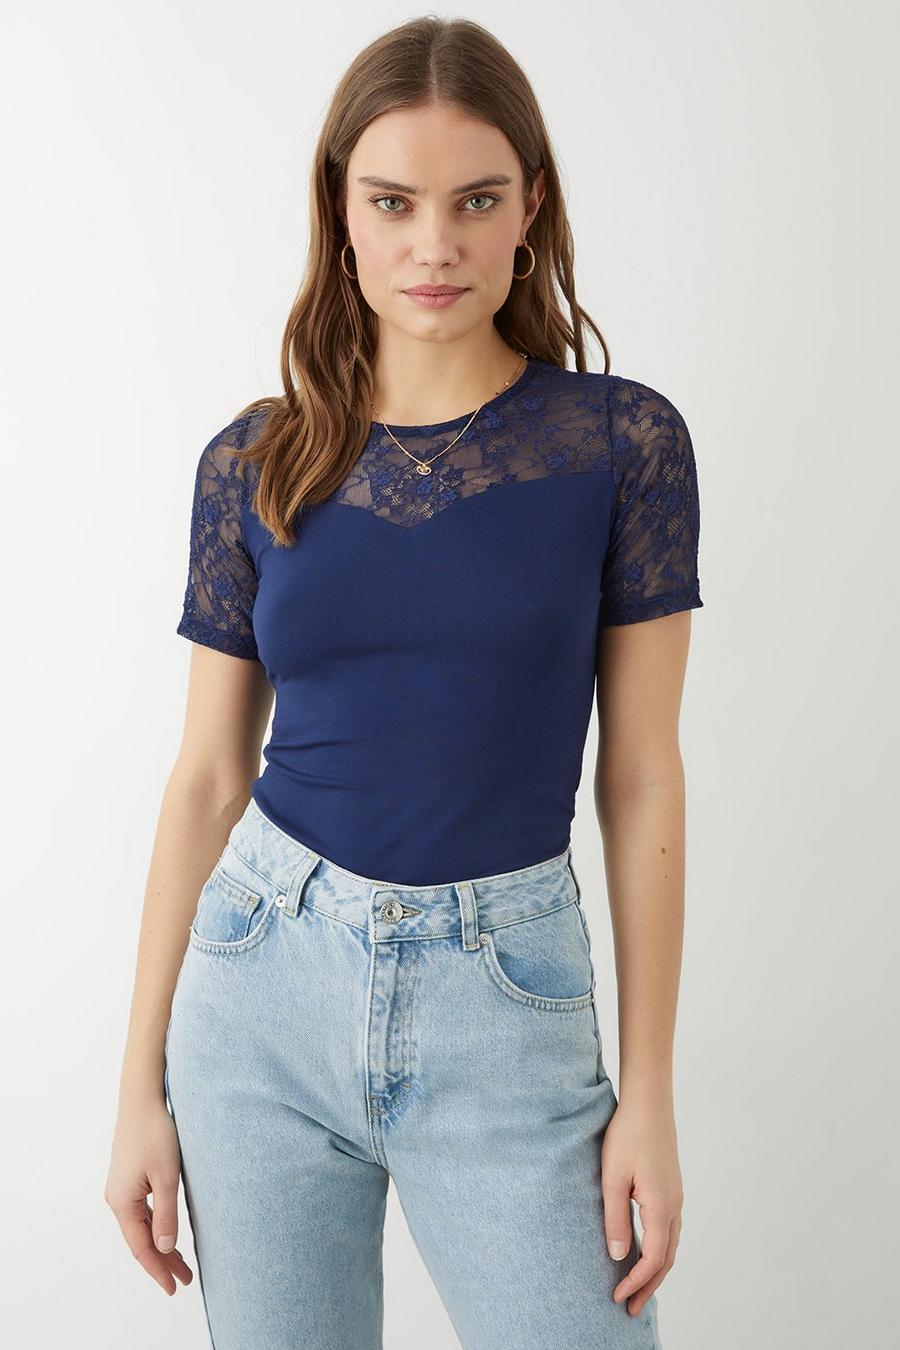 Lace Insert Short Sleeve Top